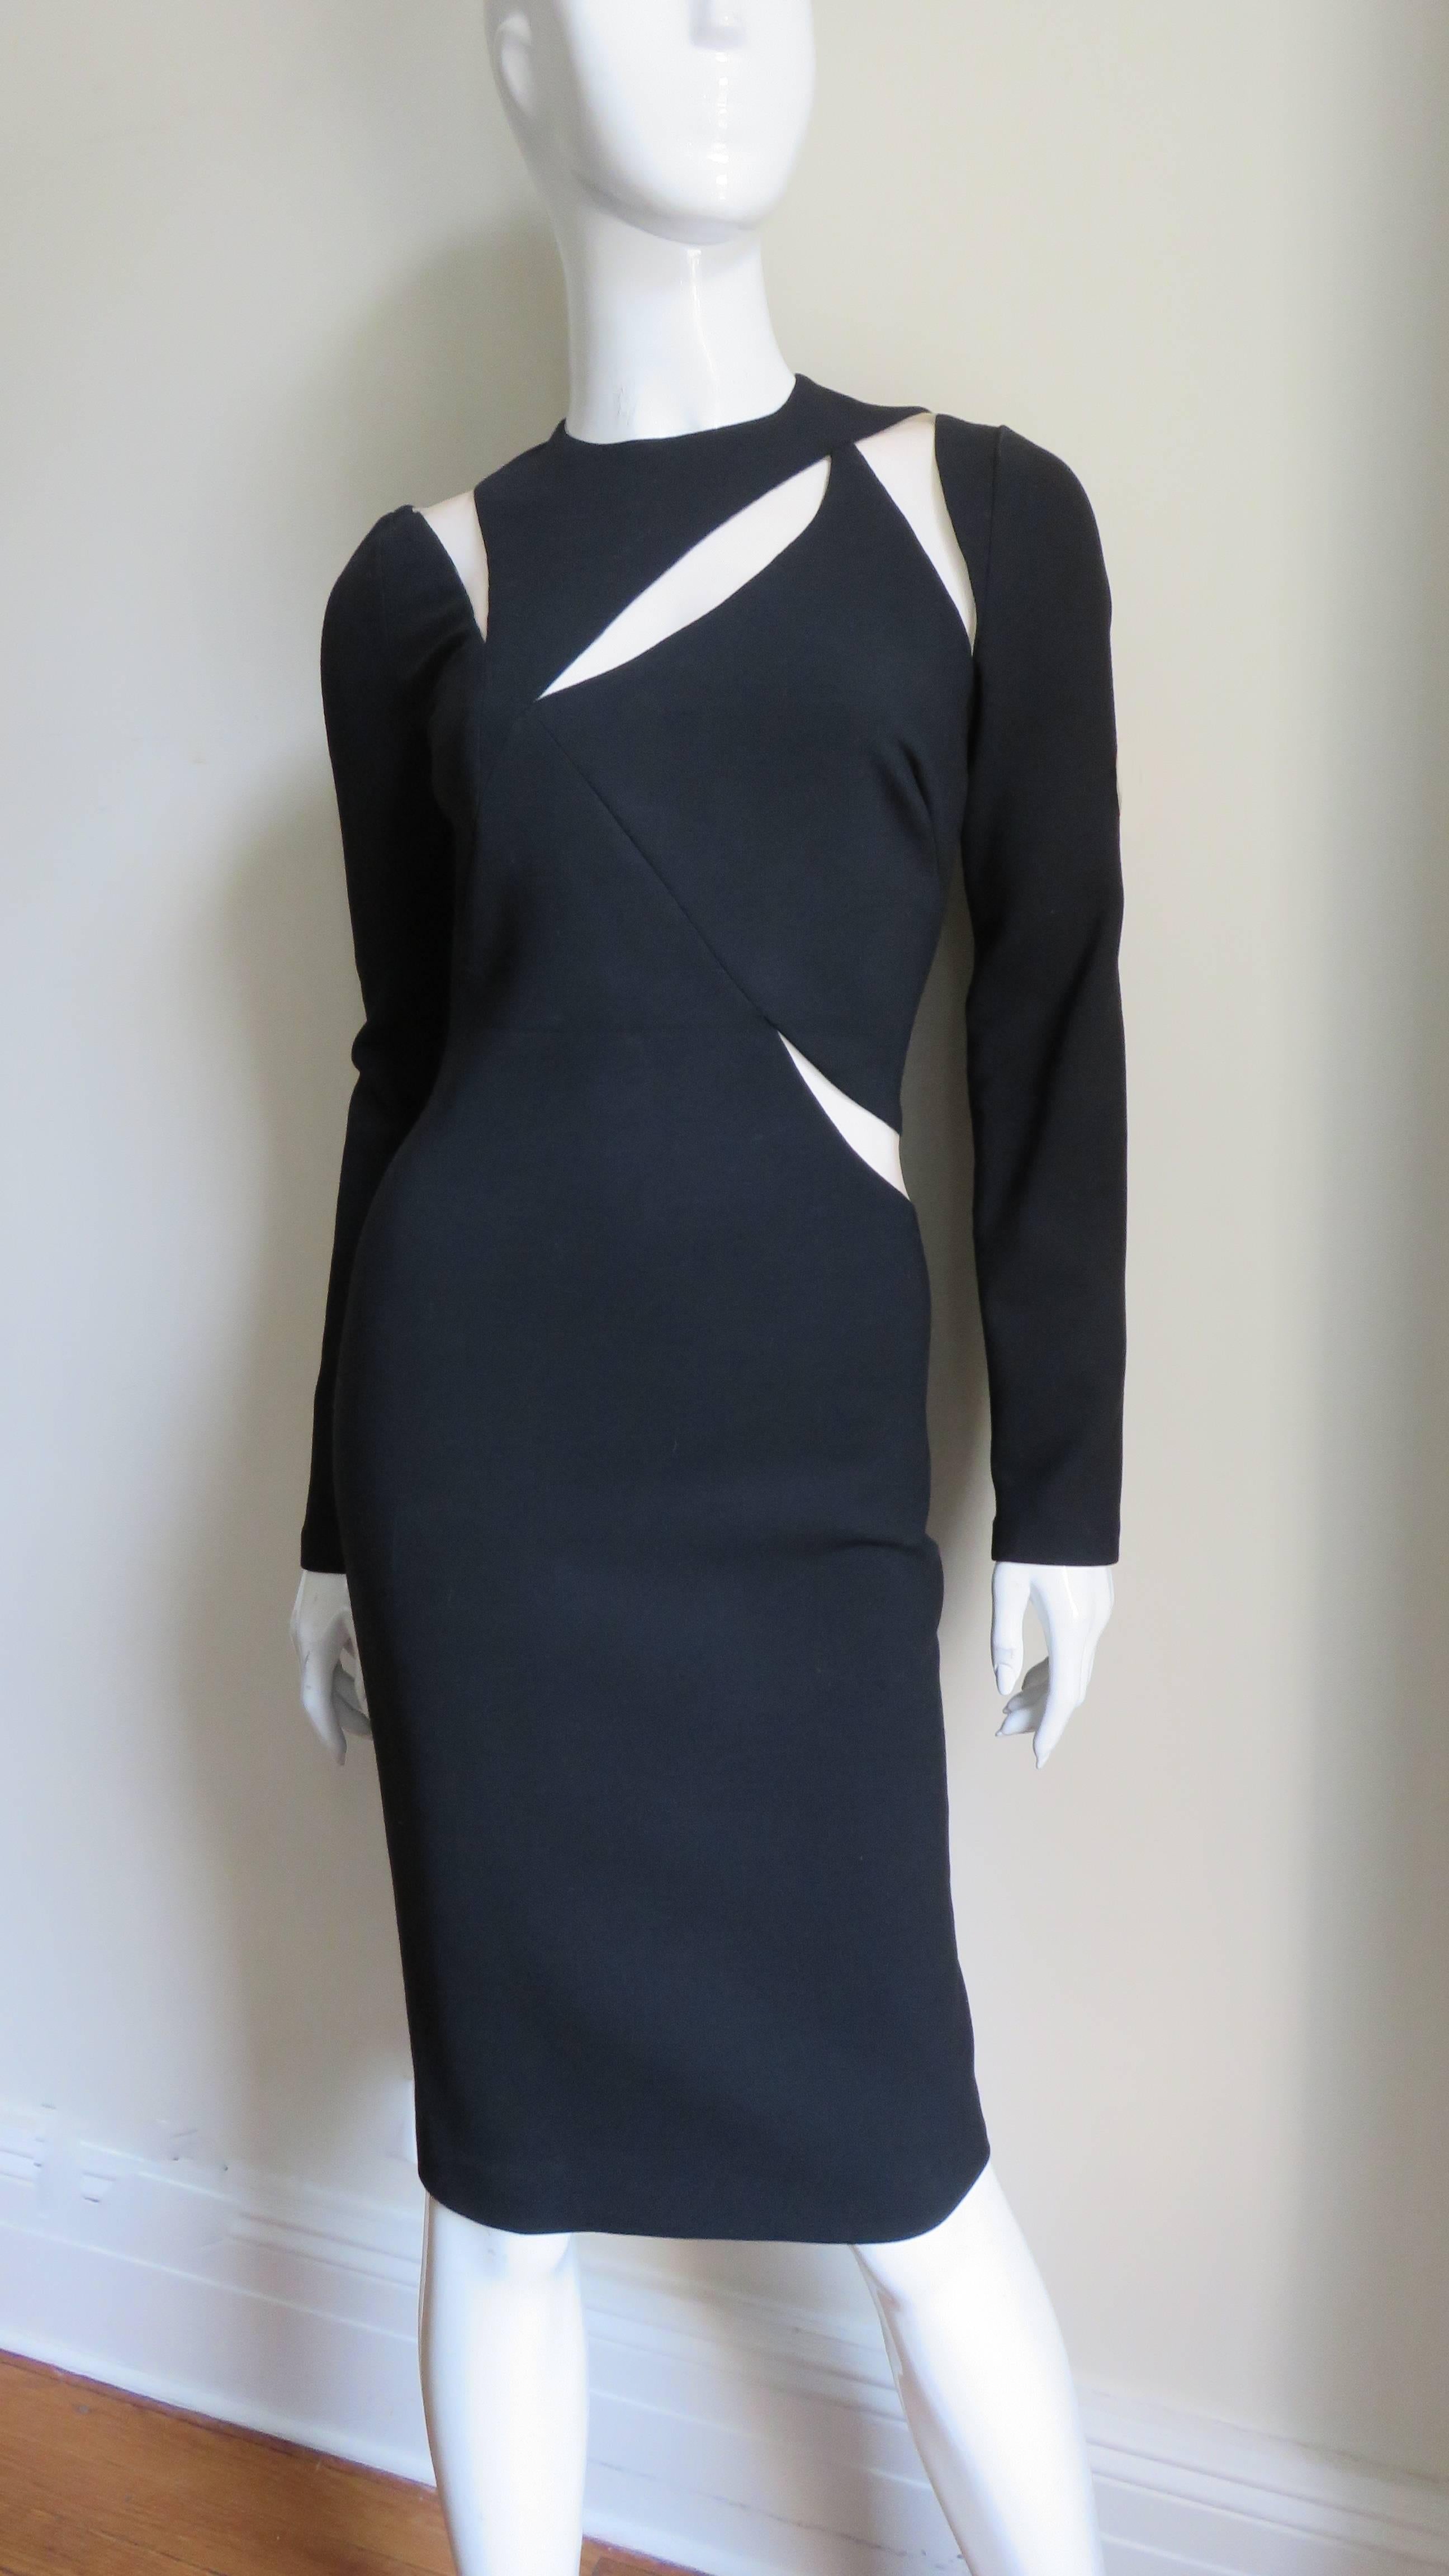 A fabulous fine black wool jersey dress from Versace.  It is semi fitted with long sleeves, a crew neck and fabulous nude mesh covered wedge and ray shaped cut outs following the intricate seaming of the bodice, waist, neckline, shoulders and across